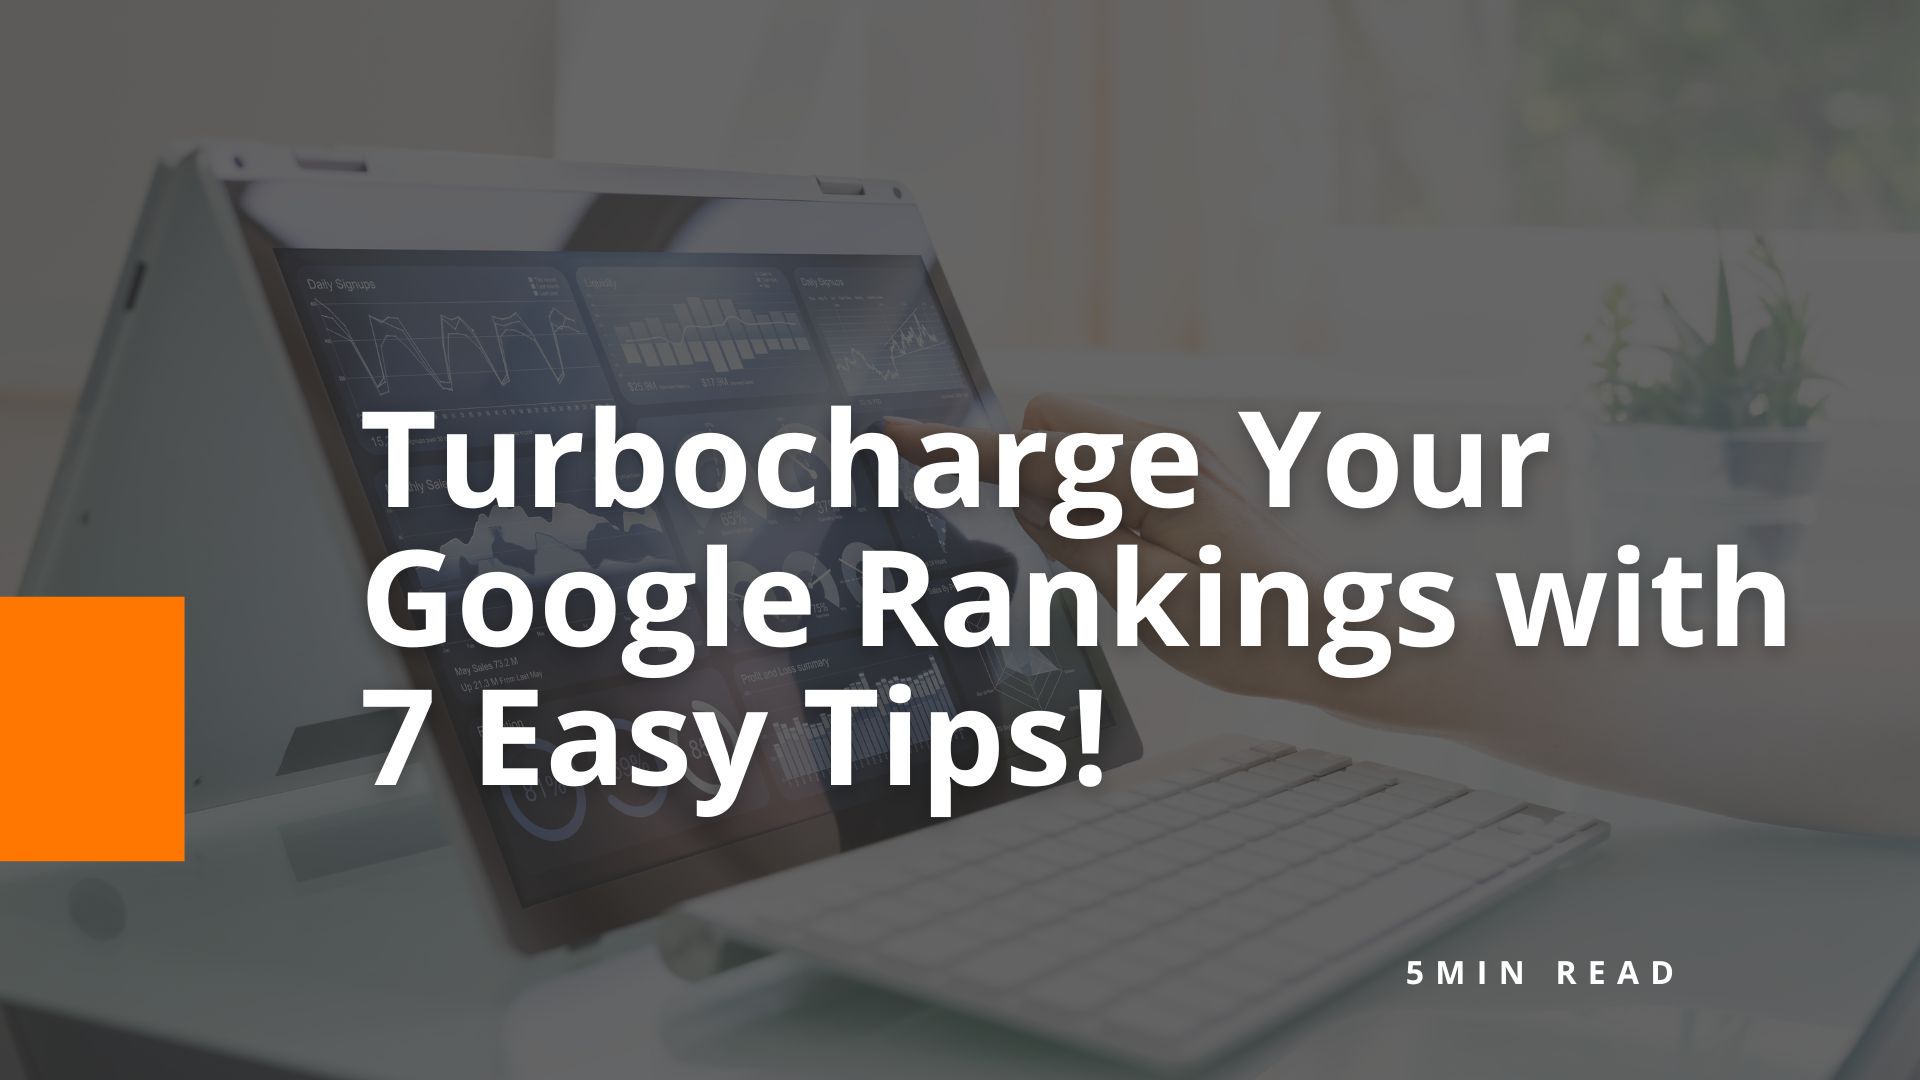 Turbocharge Your Google Rankings with 7 Easy Tips! - BOM